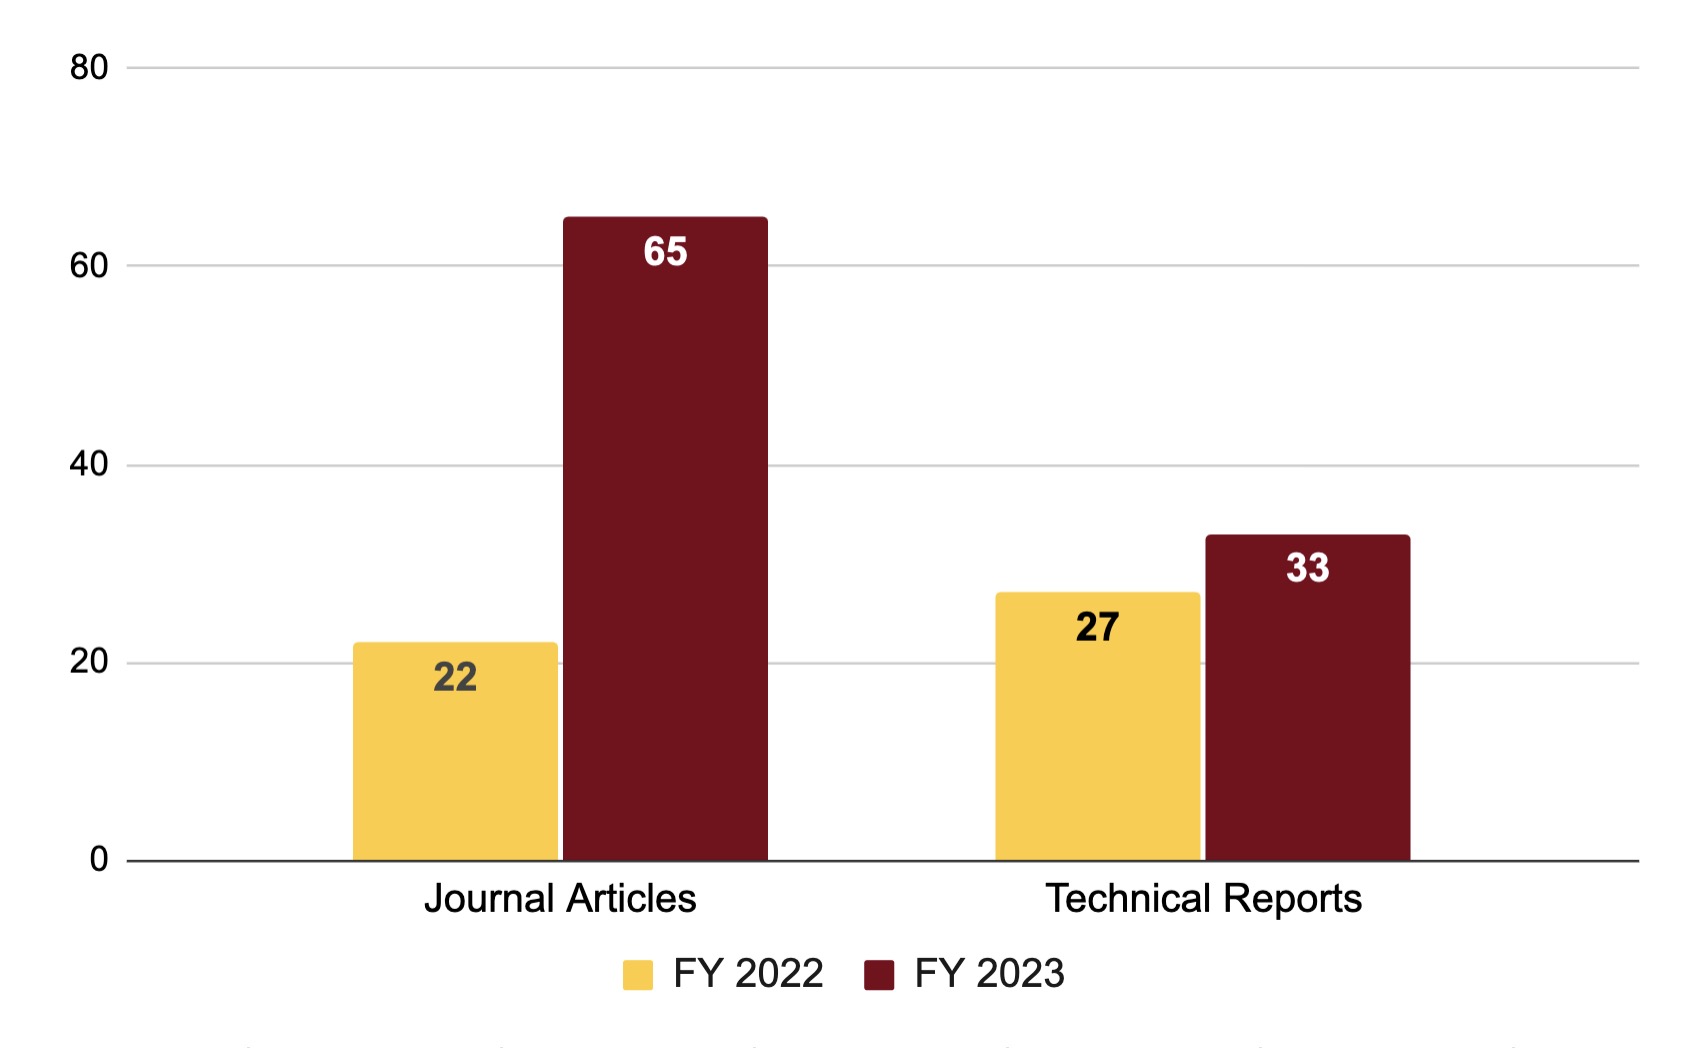 Chart: Journal Articles - 22 in FY 2022, 65 in FY 2023; Technical Reports: 27 in FY 2022, 33 in FY 2023